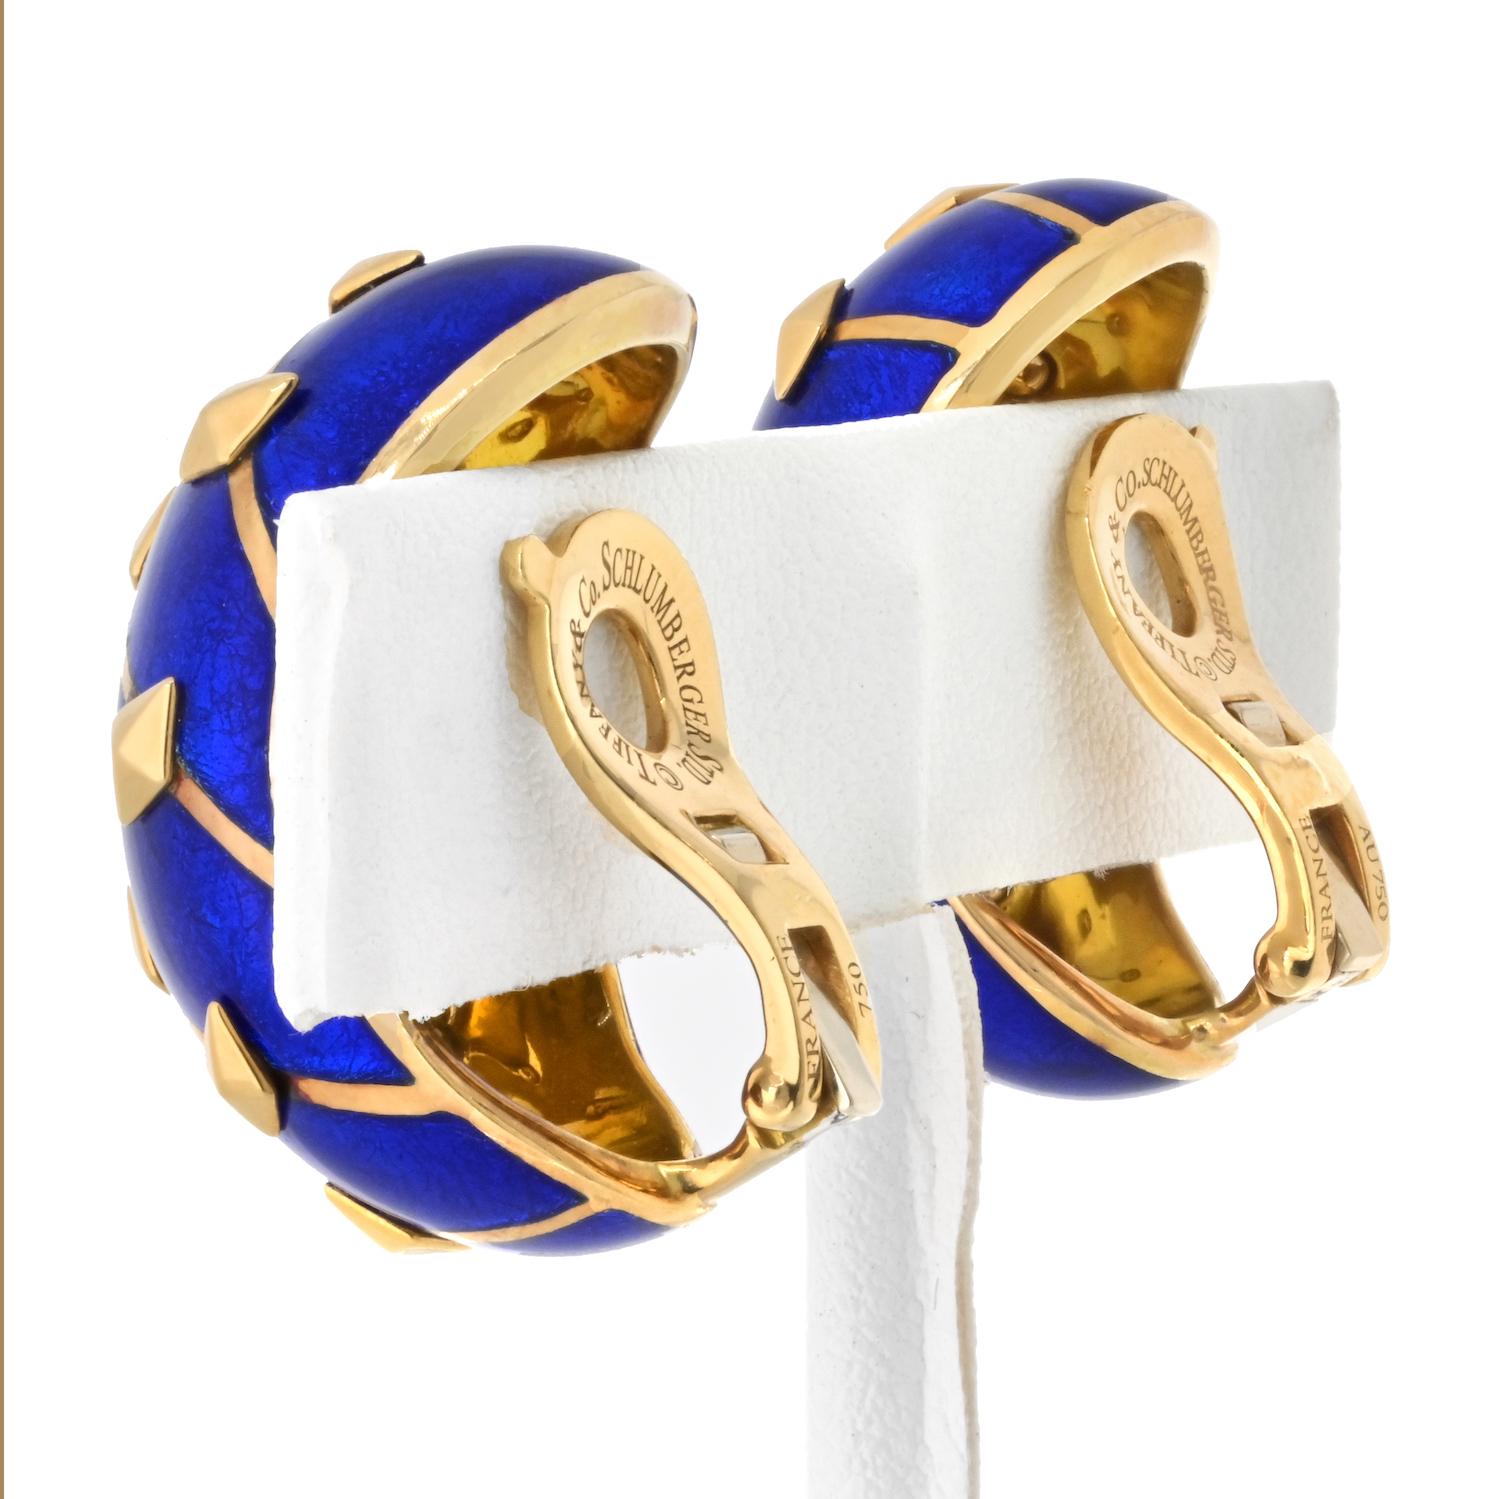 Tiffany & Co. Schlumberger Blue Enamel Diamond Banana Clip-On Earrings 18K Gold In Excellent Condition For Sale In New York, NY